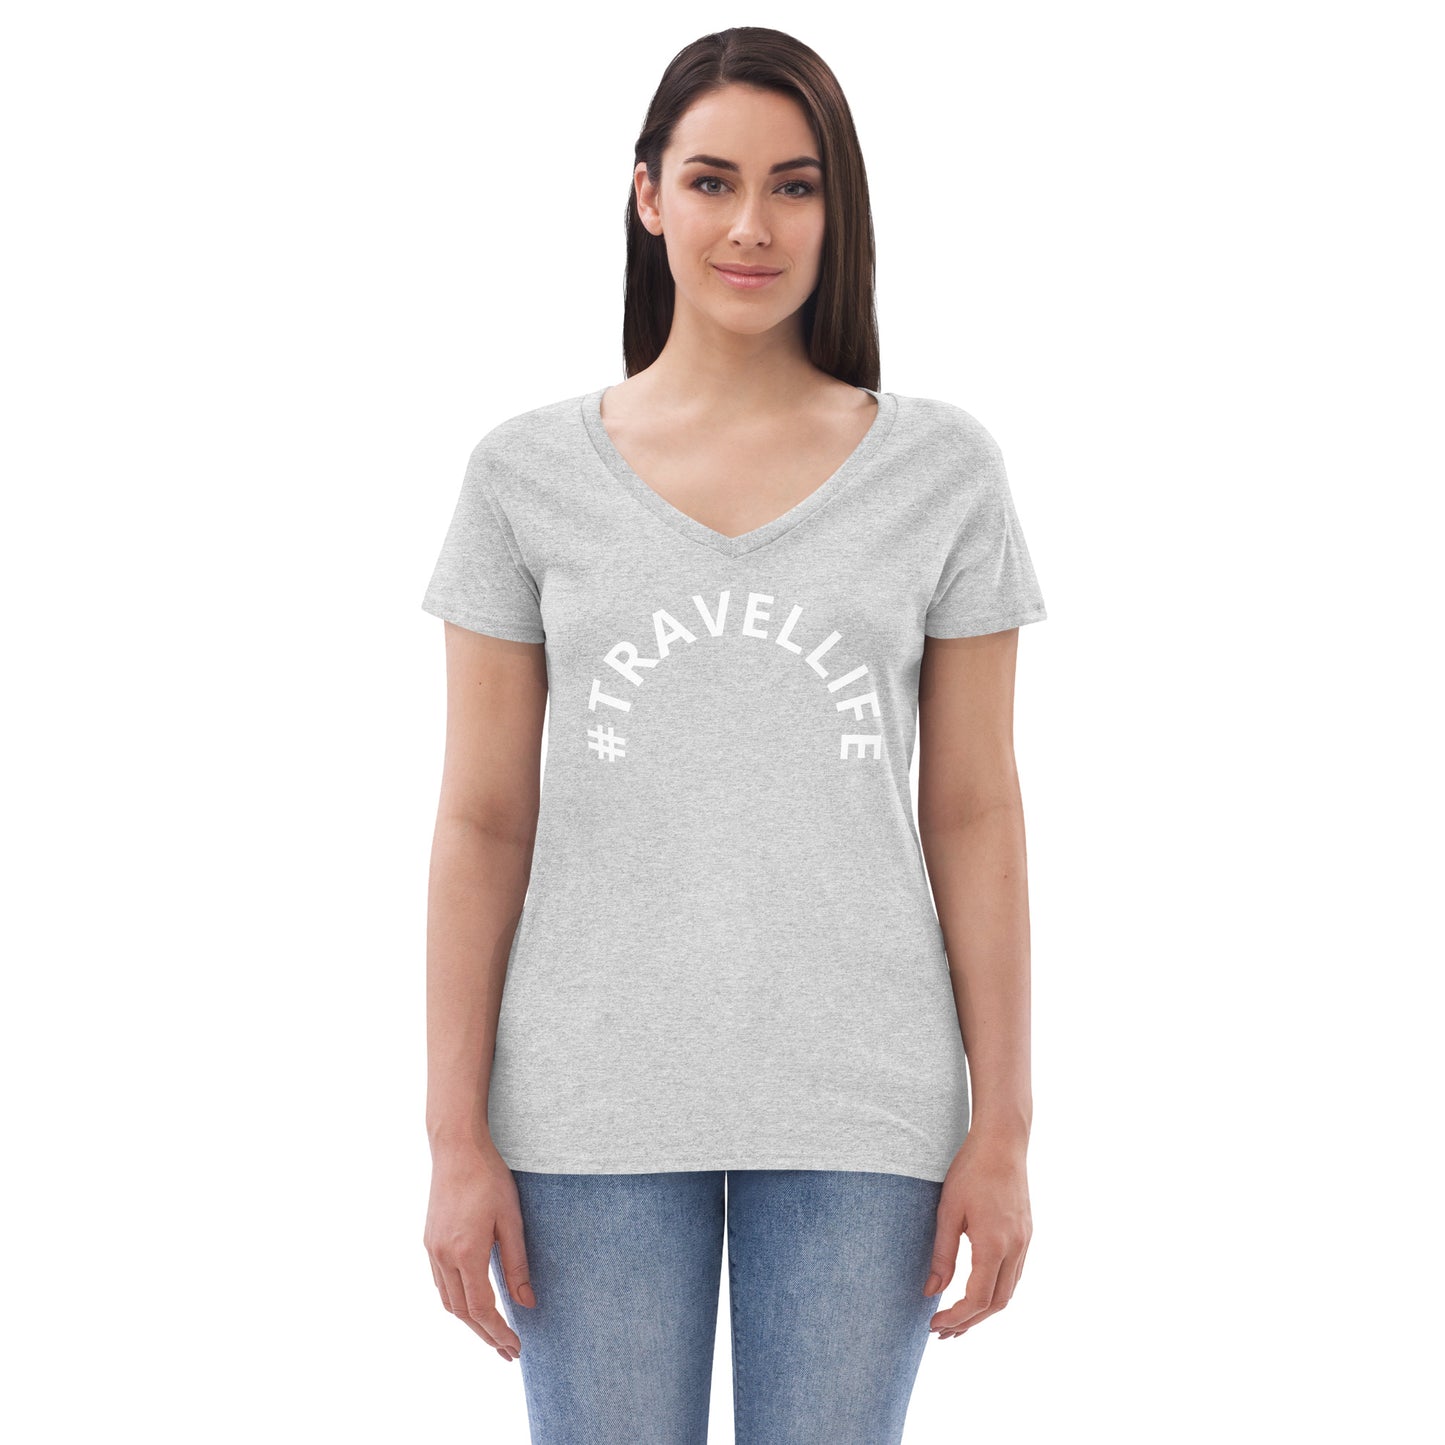 #Travellife Arc Women’s Recycled V-neck T-shirt White Text